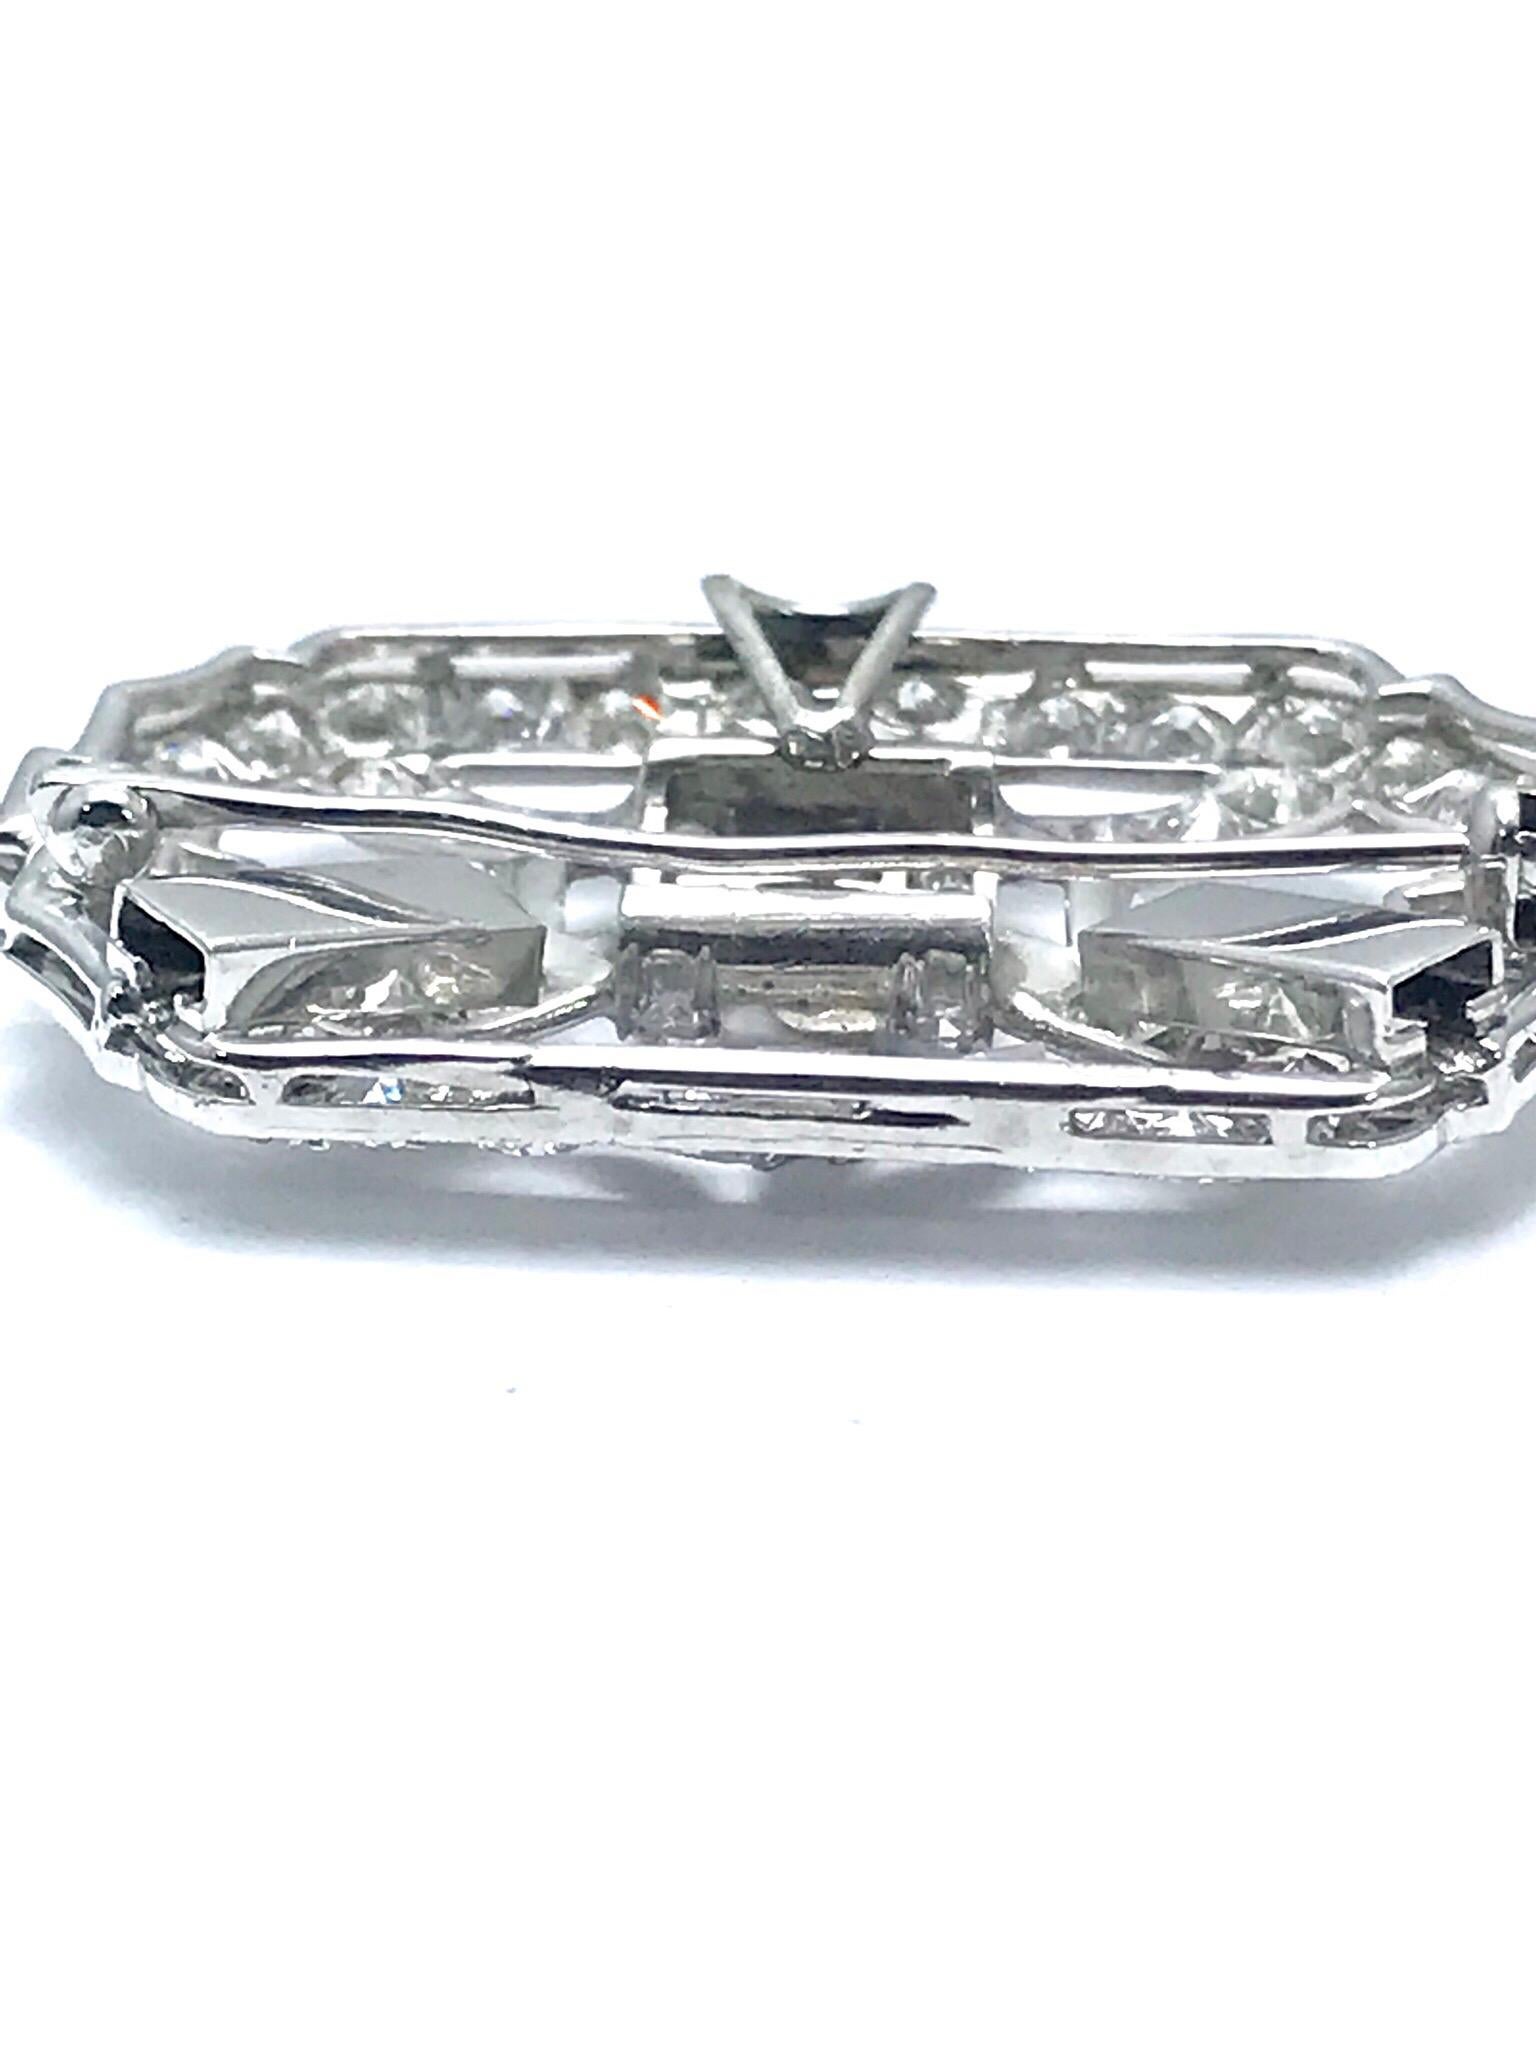 4.10 Carat Diamond Art Deco Style Platinum Brooch Pendant In Excellent Condition For Sale In Chevy Chase, MD